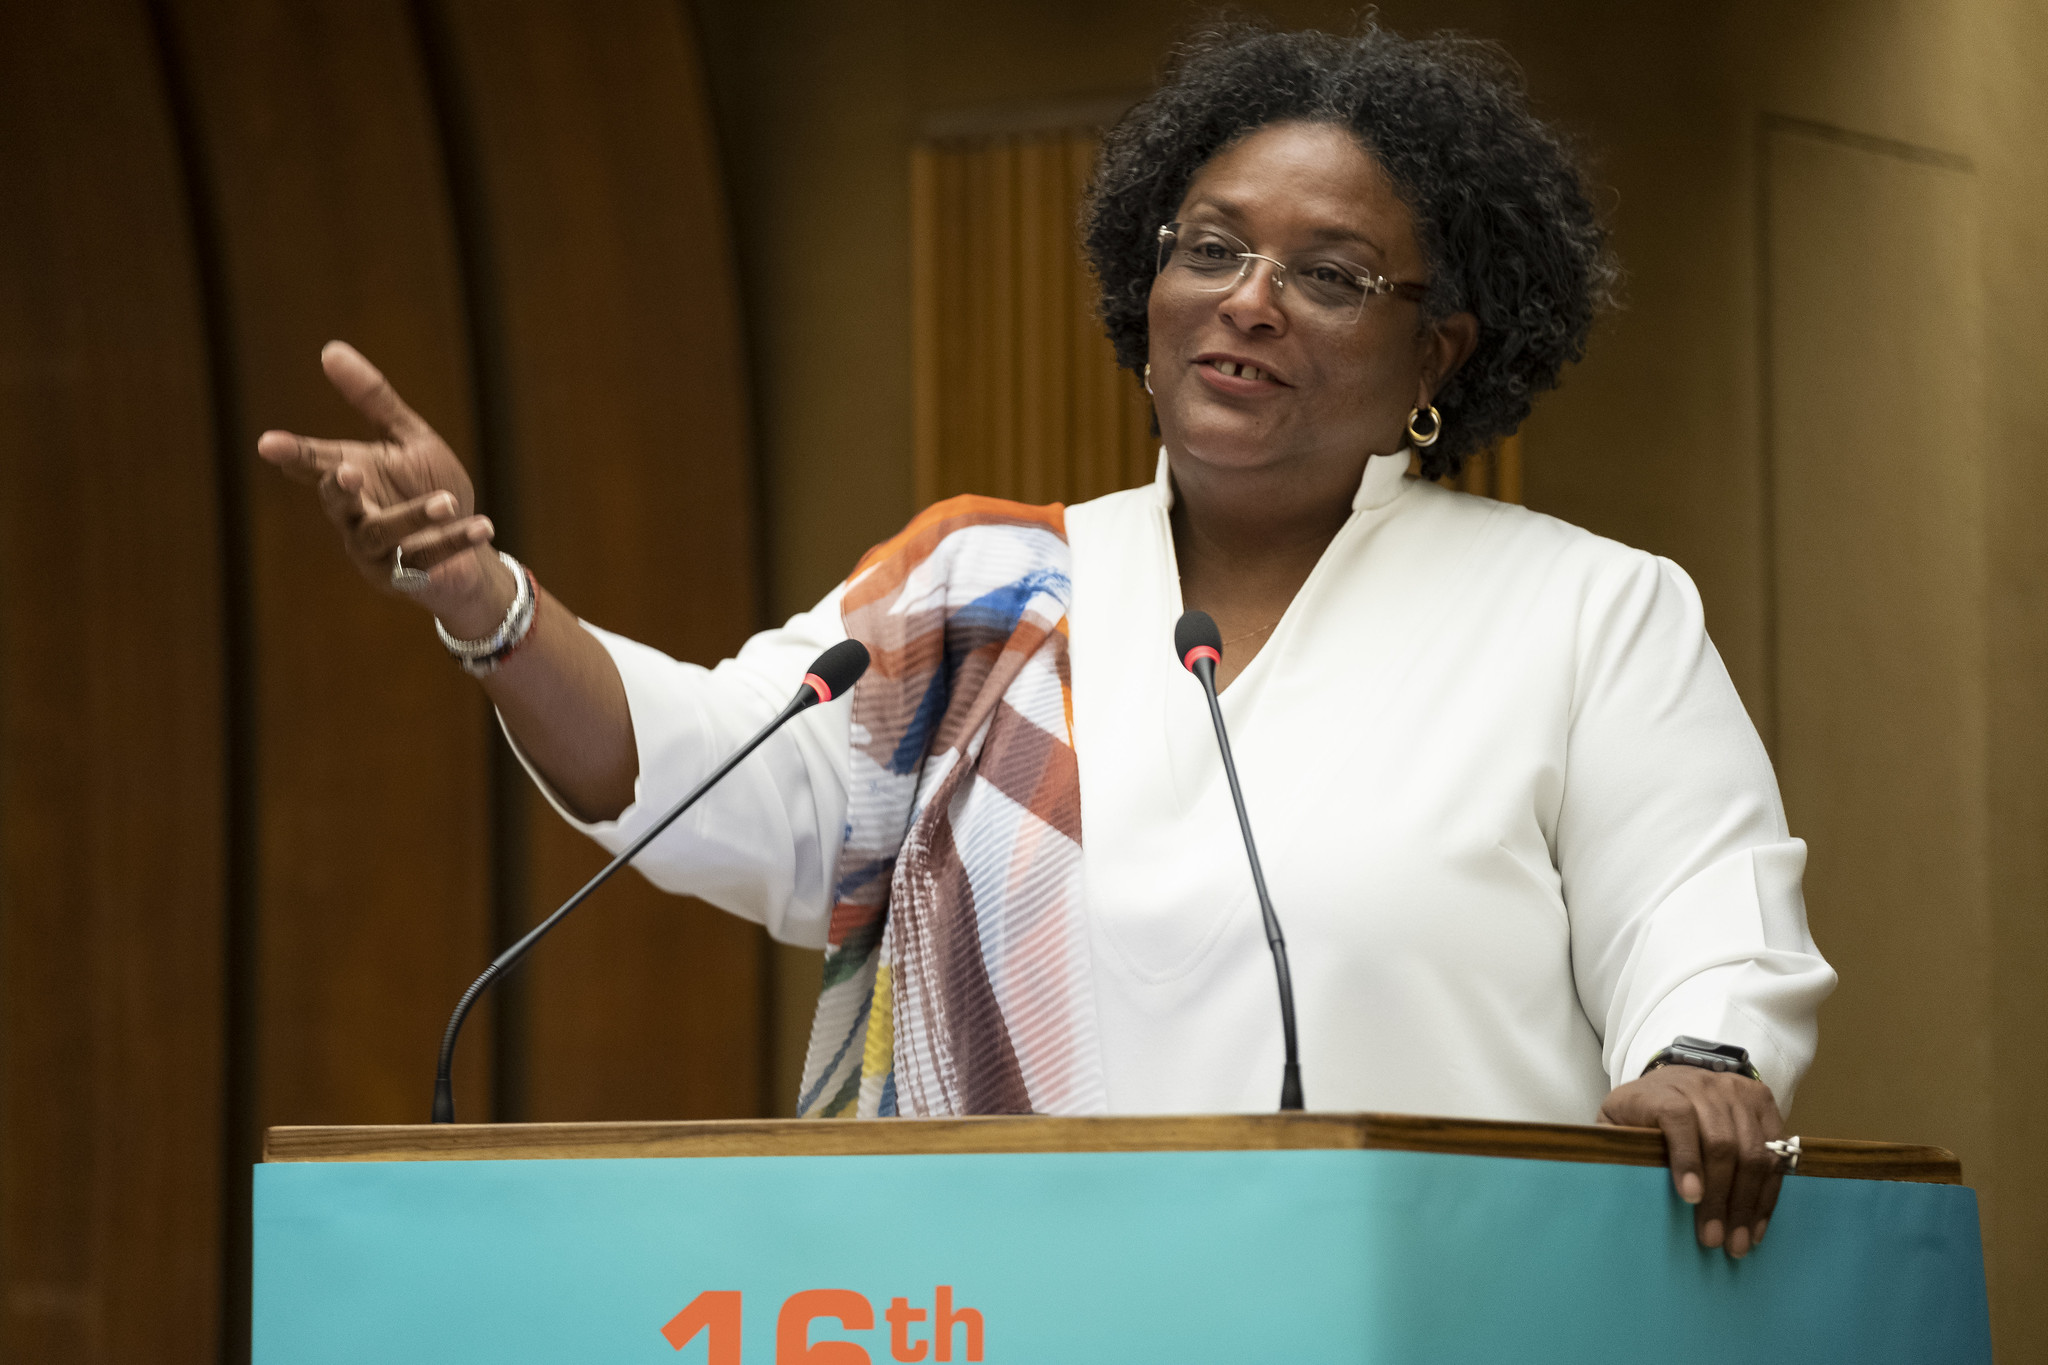 TIME Magazine chooses Barbados Prime Minister Mia Mottley as one of 'the world's most influential people' · Global Voices